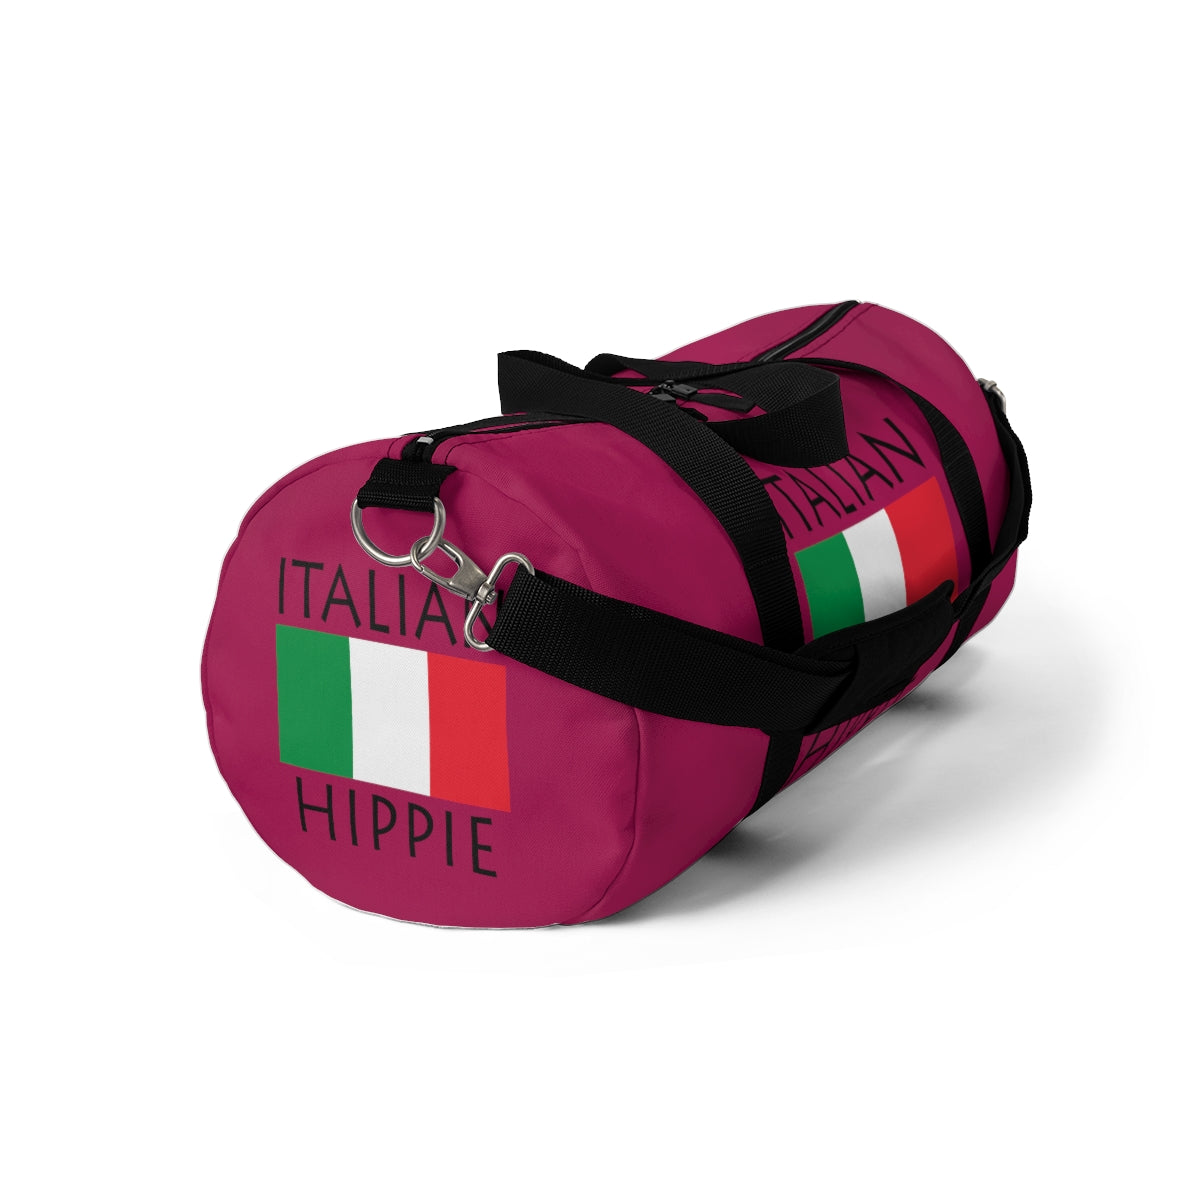  Stately Wear's Italian Flag Hippie duffel bag is colorful, iconic and stylish. We are a Katie Couric Shop partner. This duffel bag is the perfect accessory as a beach bag, ski bag, travel bag, shopping bag & gym bag, Pilates bag or yoga bag. Custom made one-at-a-time with environmentally friendly biodegradable inks & dyes. 2 sizes to choose. Stately Wear's bags are very durable, soft and colorful duffels with durable straps.